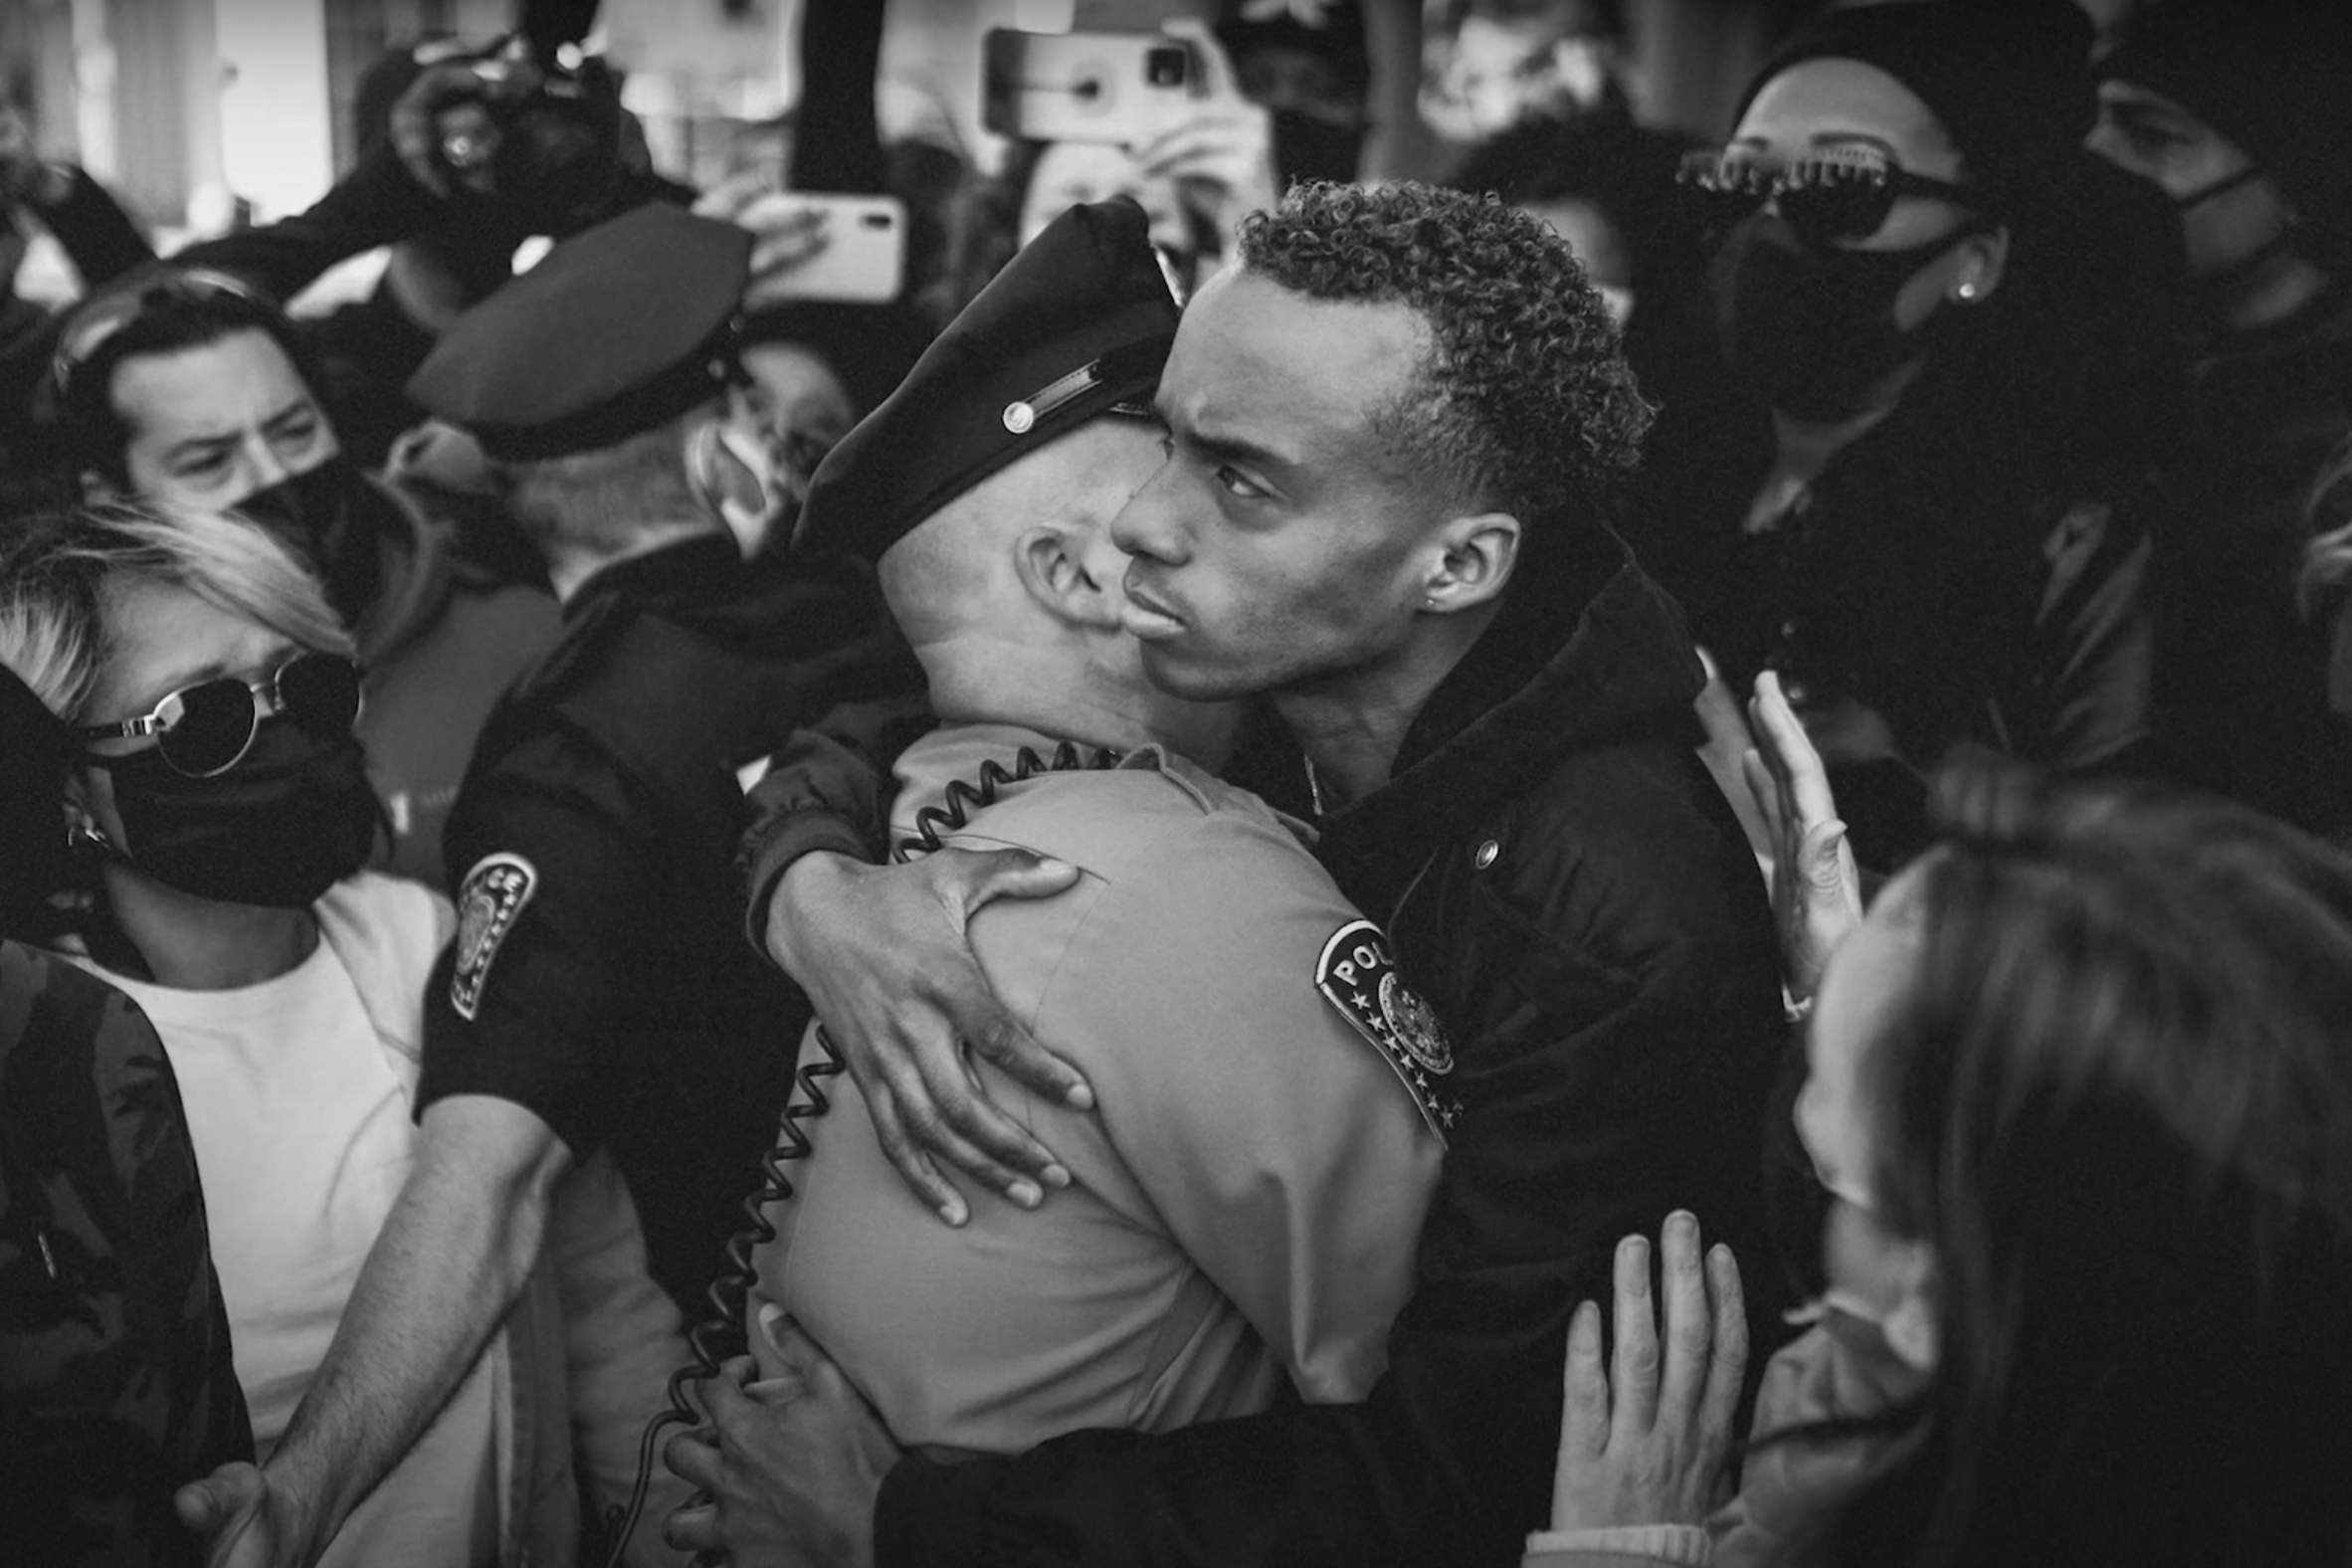 A young black man hugs a white police officer in a crowd.